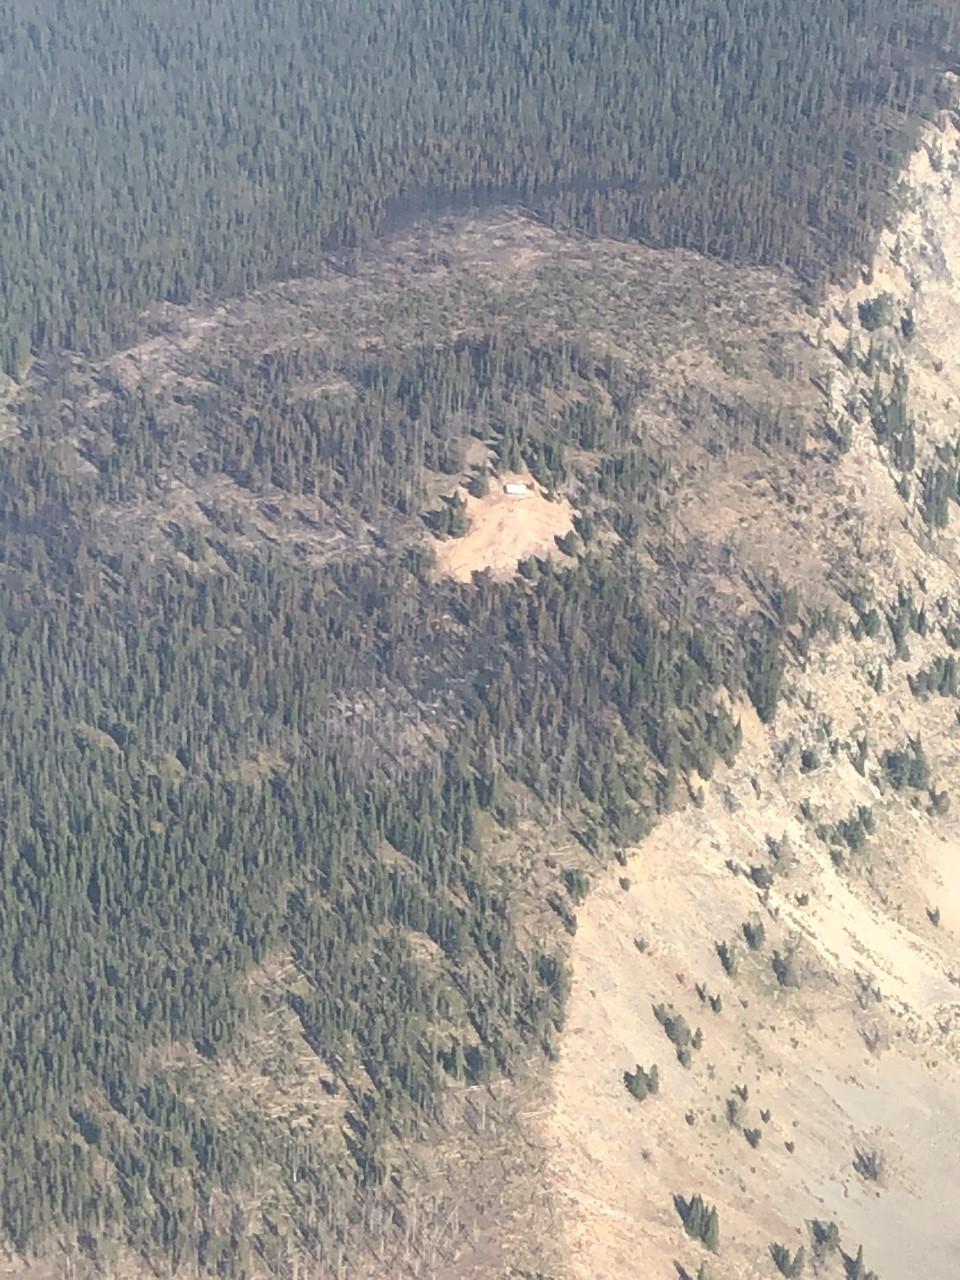 The photo shows an aerial image of a forested area with a clearing in the middle. There is a beige rocky outcropping in the middle of the photo with a small, reflective structure on it.